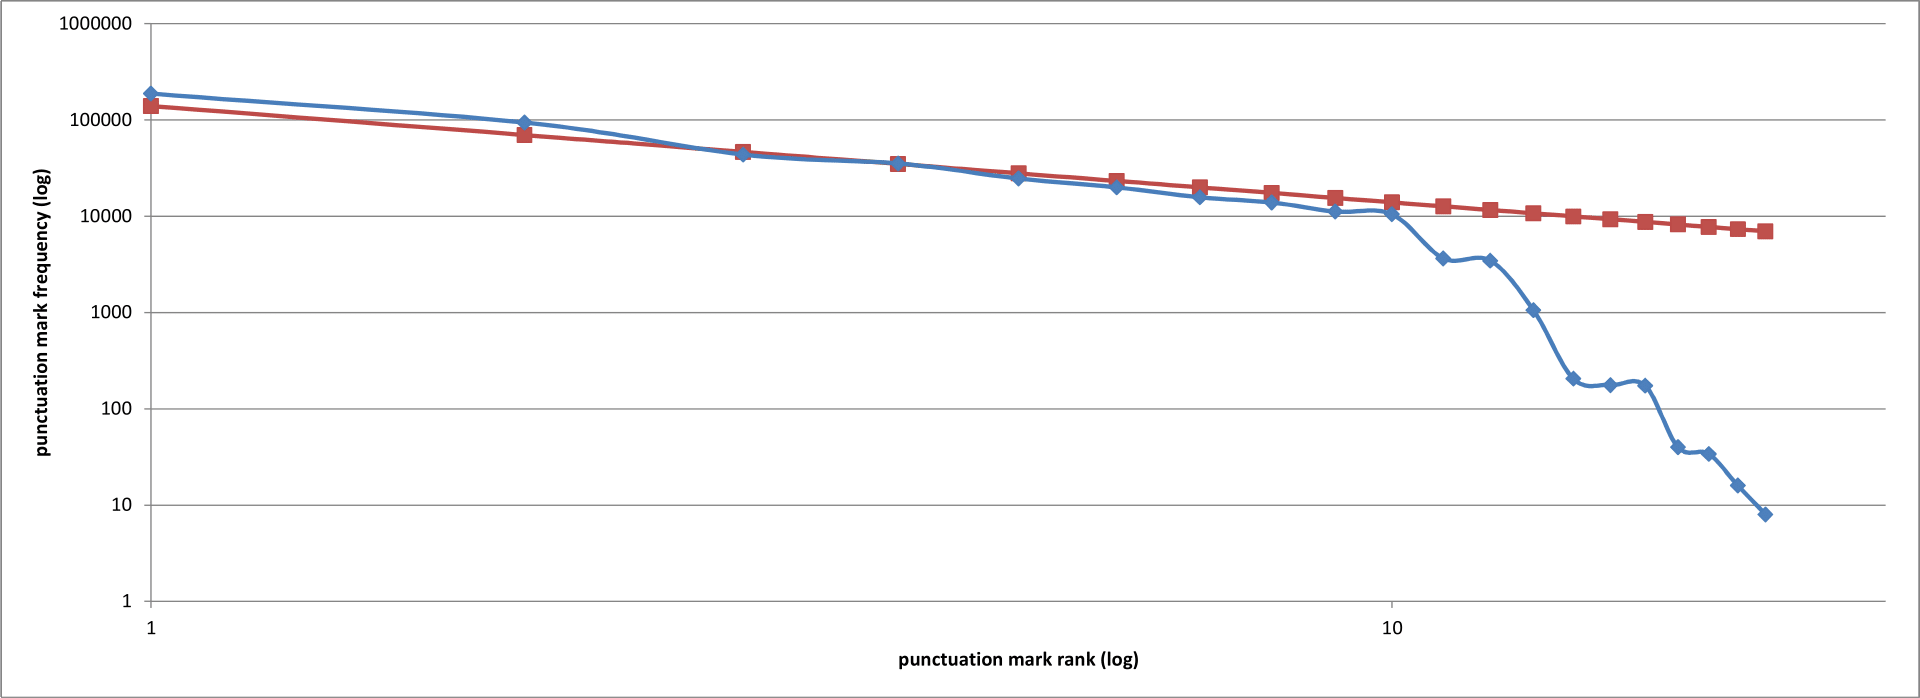 Punctuation mark counts (blue) in a selection of works from Project Gutenberg, ordered from most to least common. Also shown are the projected counts (red). Both axes are plotted on a logarithmic scale.